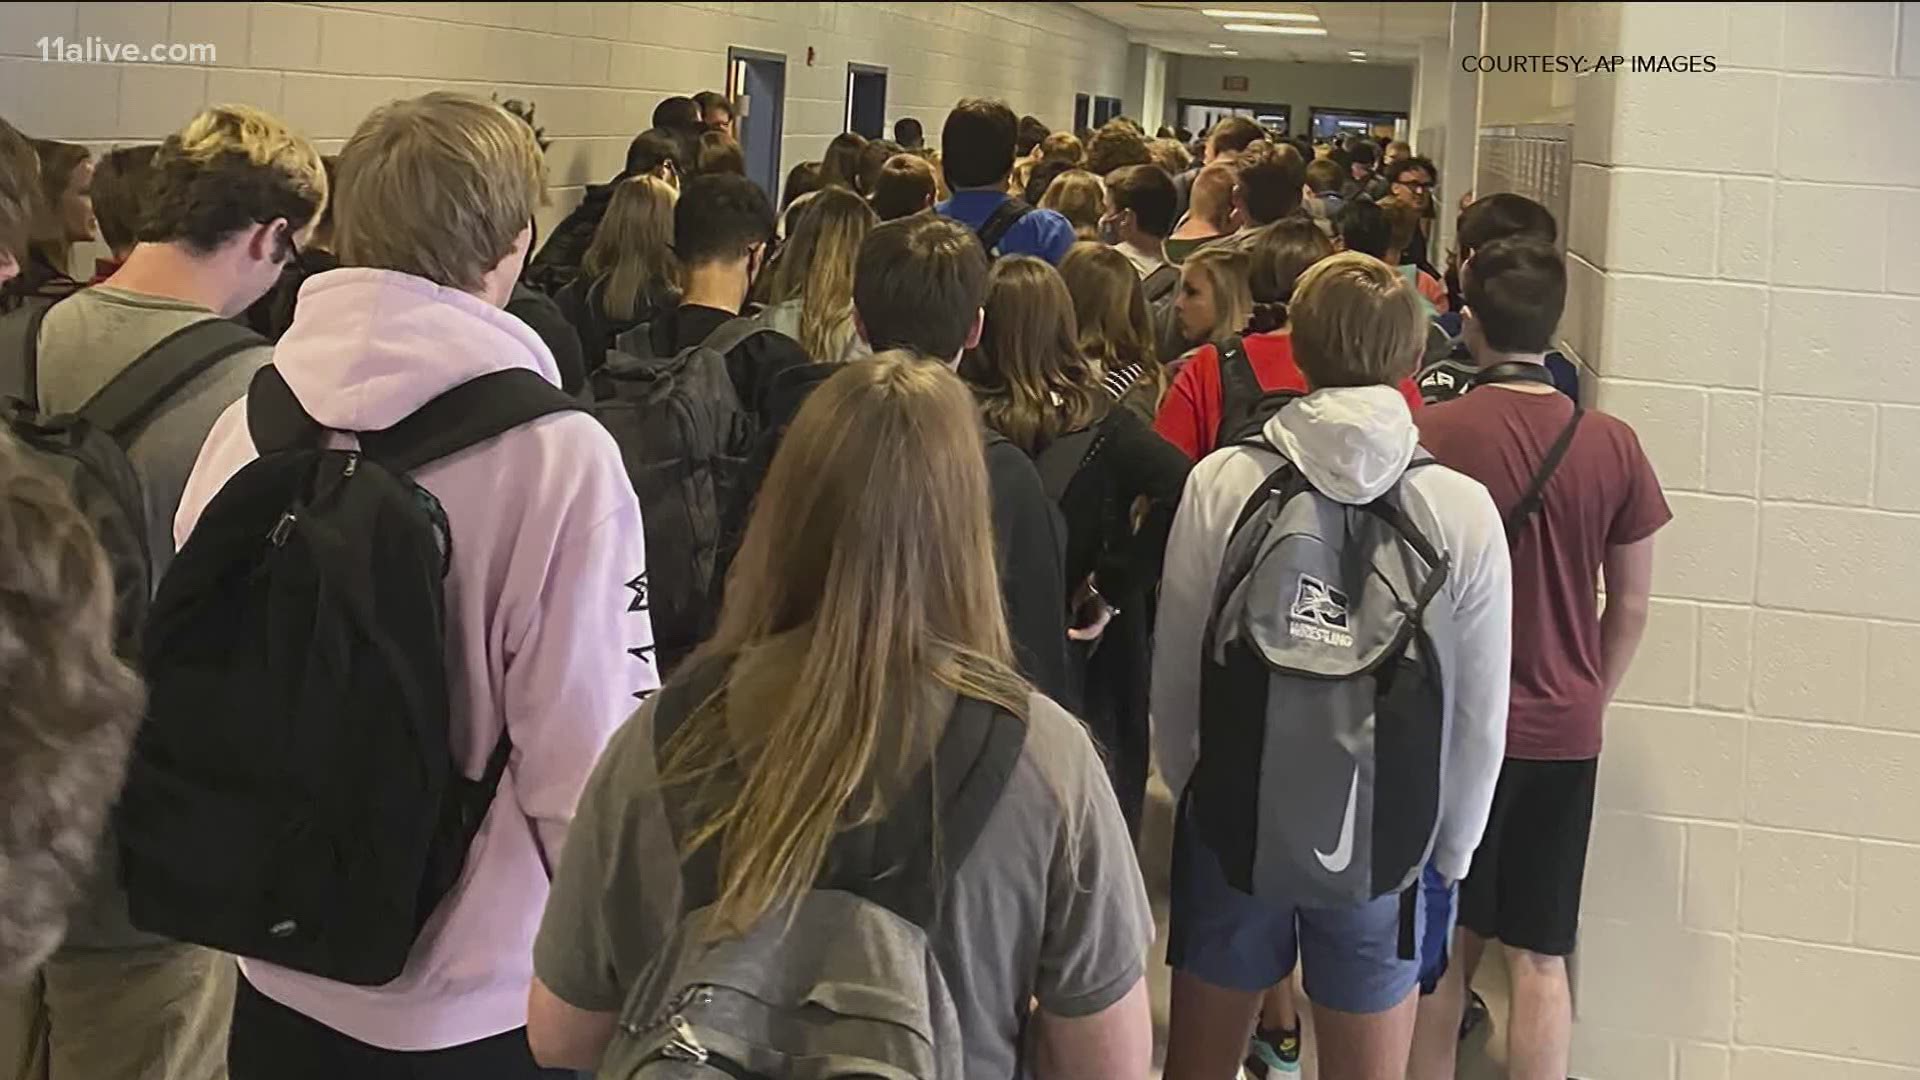 A photo of North Paulding High School shared by a student has garnered reaction around the U.S. Now, the same school announced COVID infections.